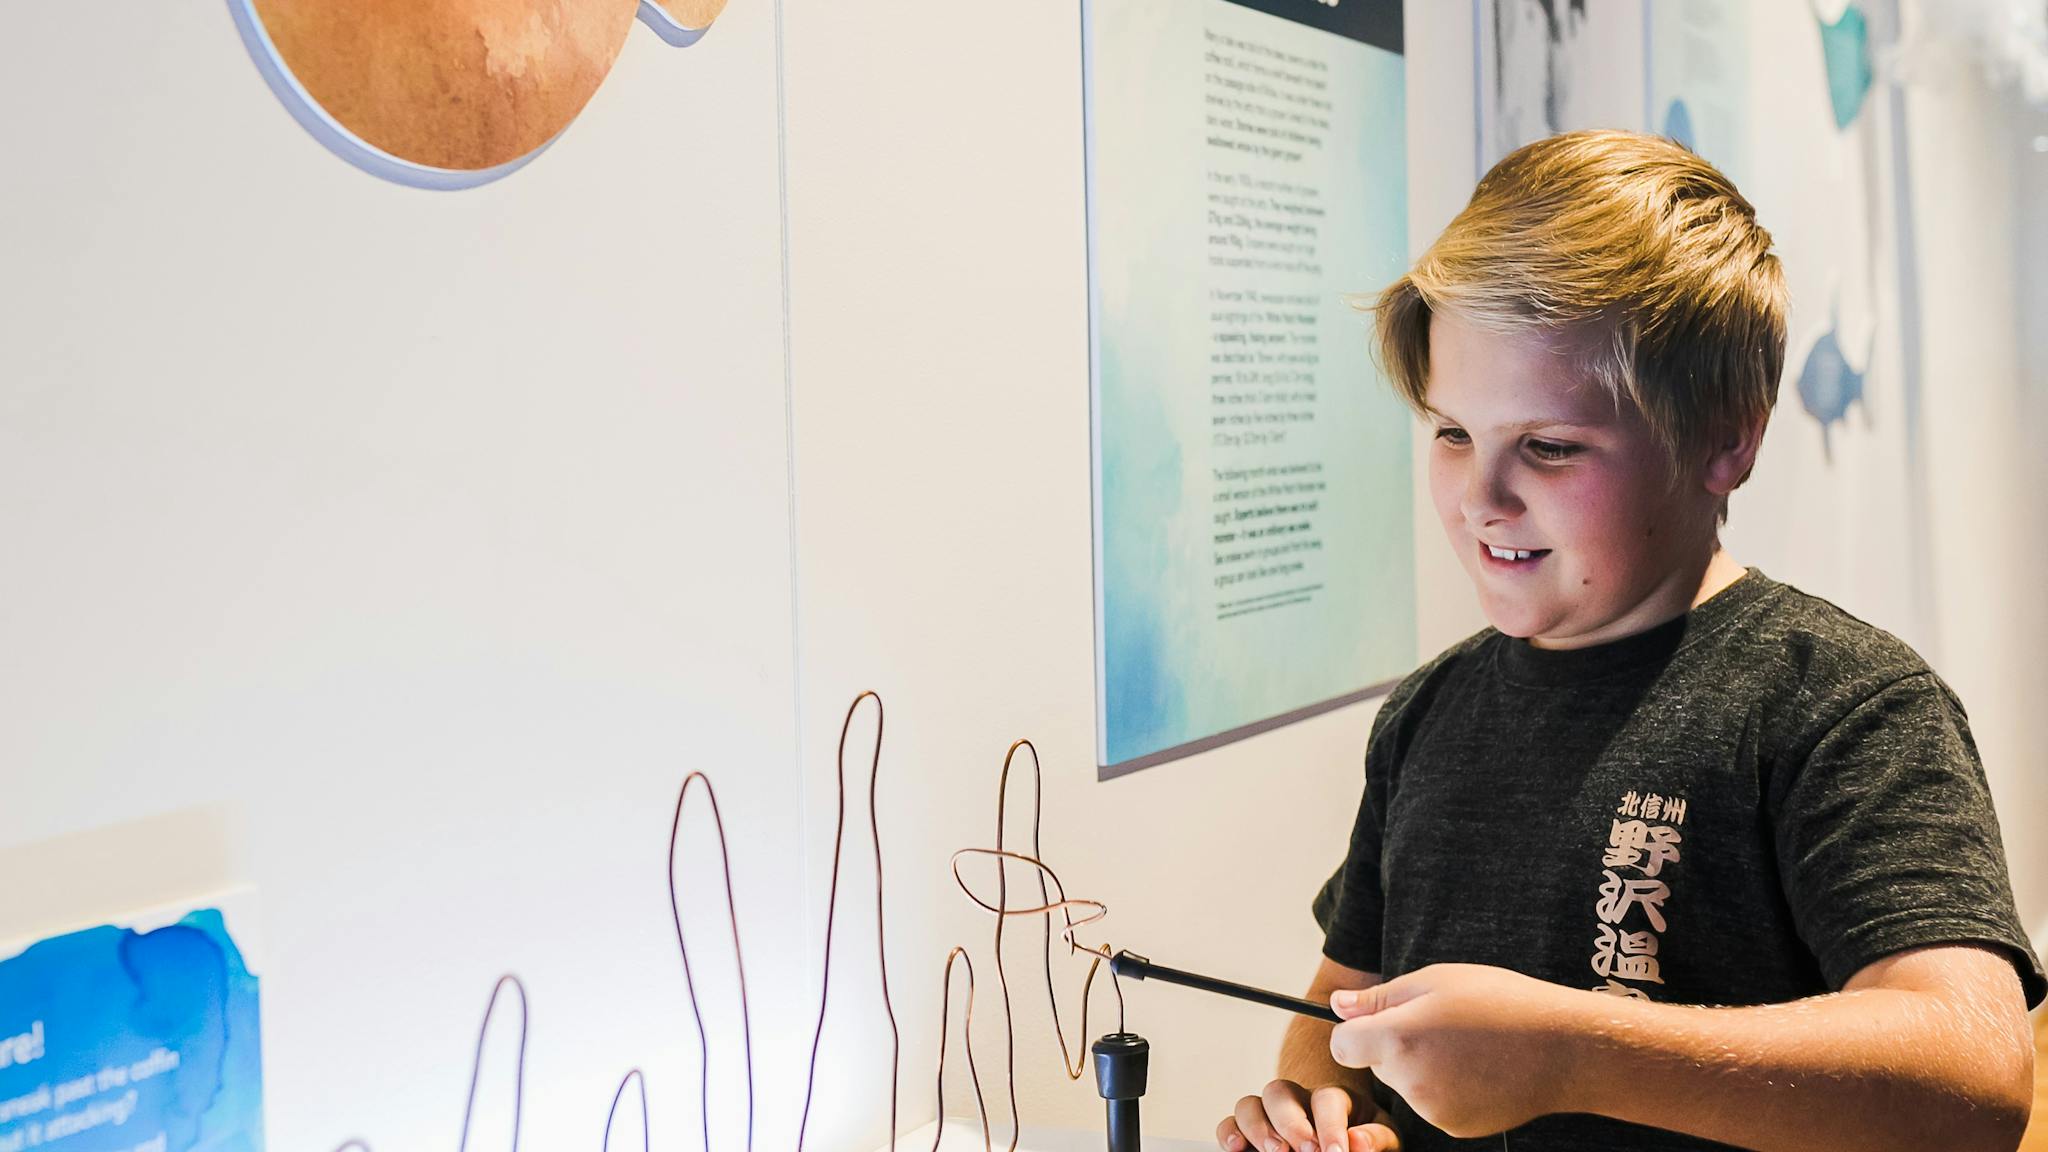 Boy interacting with museum display